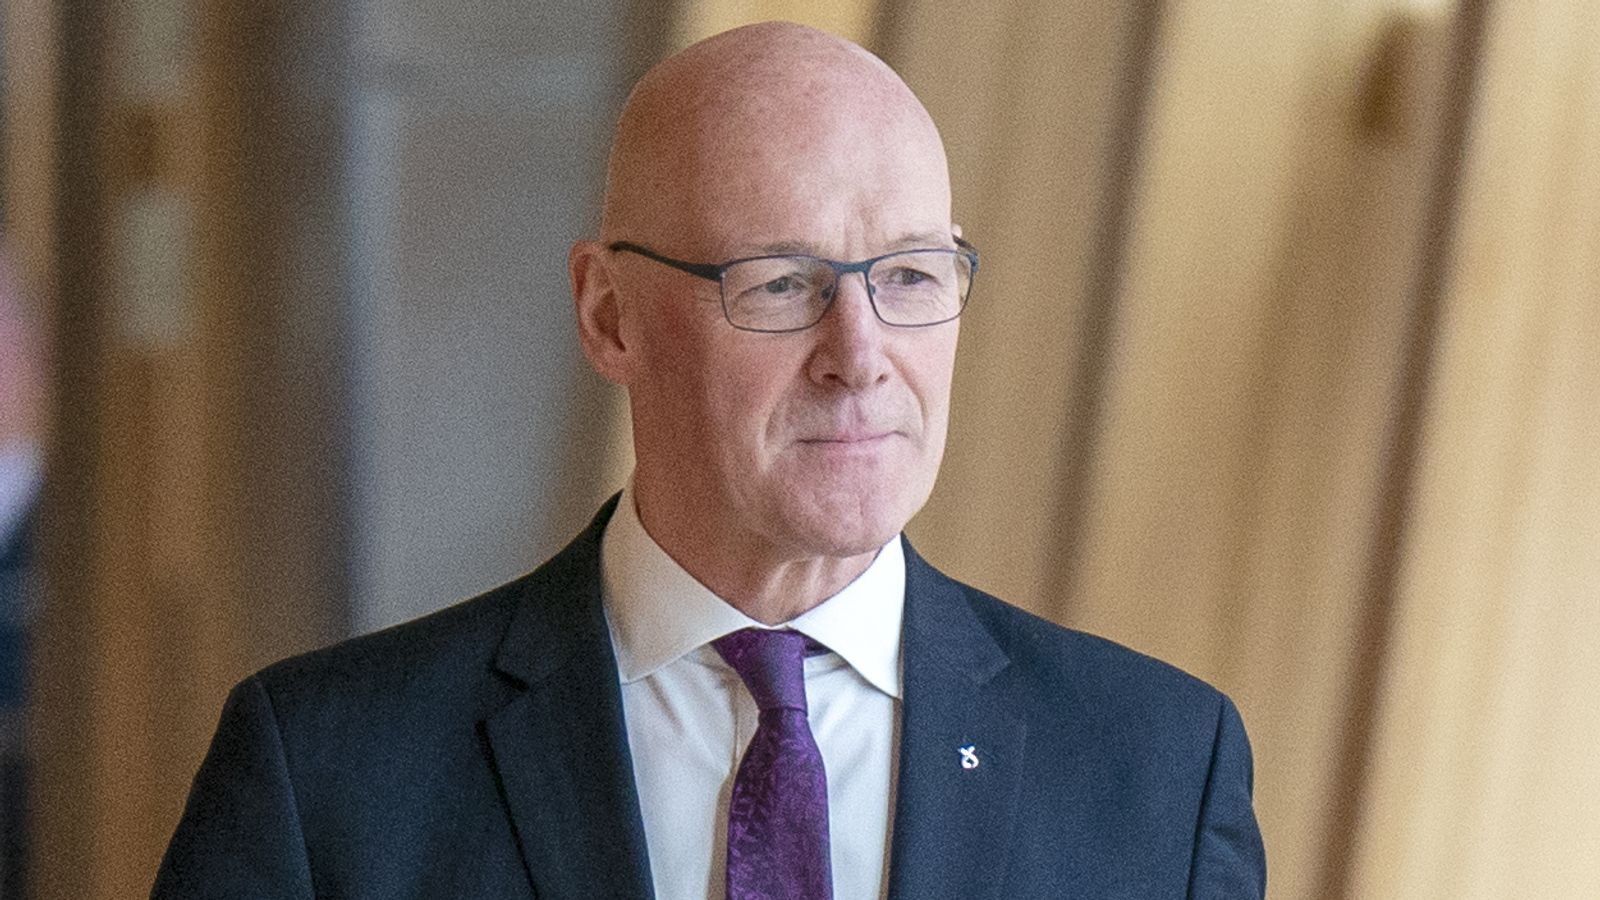 john swinney set to become scotland's next first minister as rival quits race